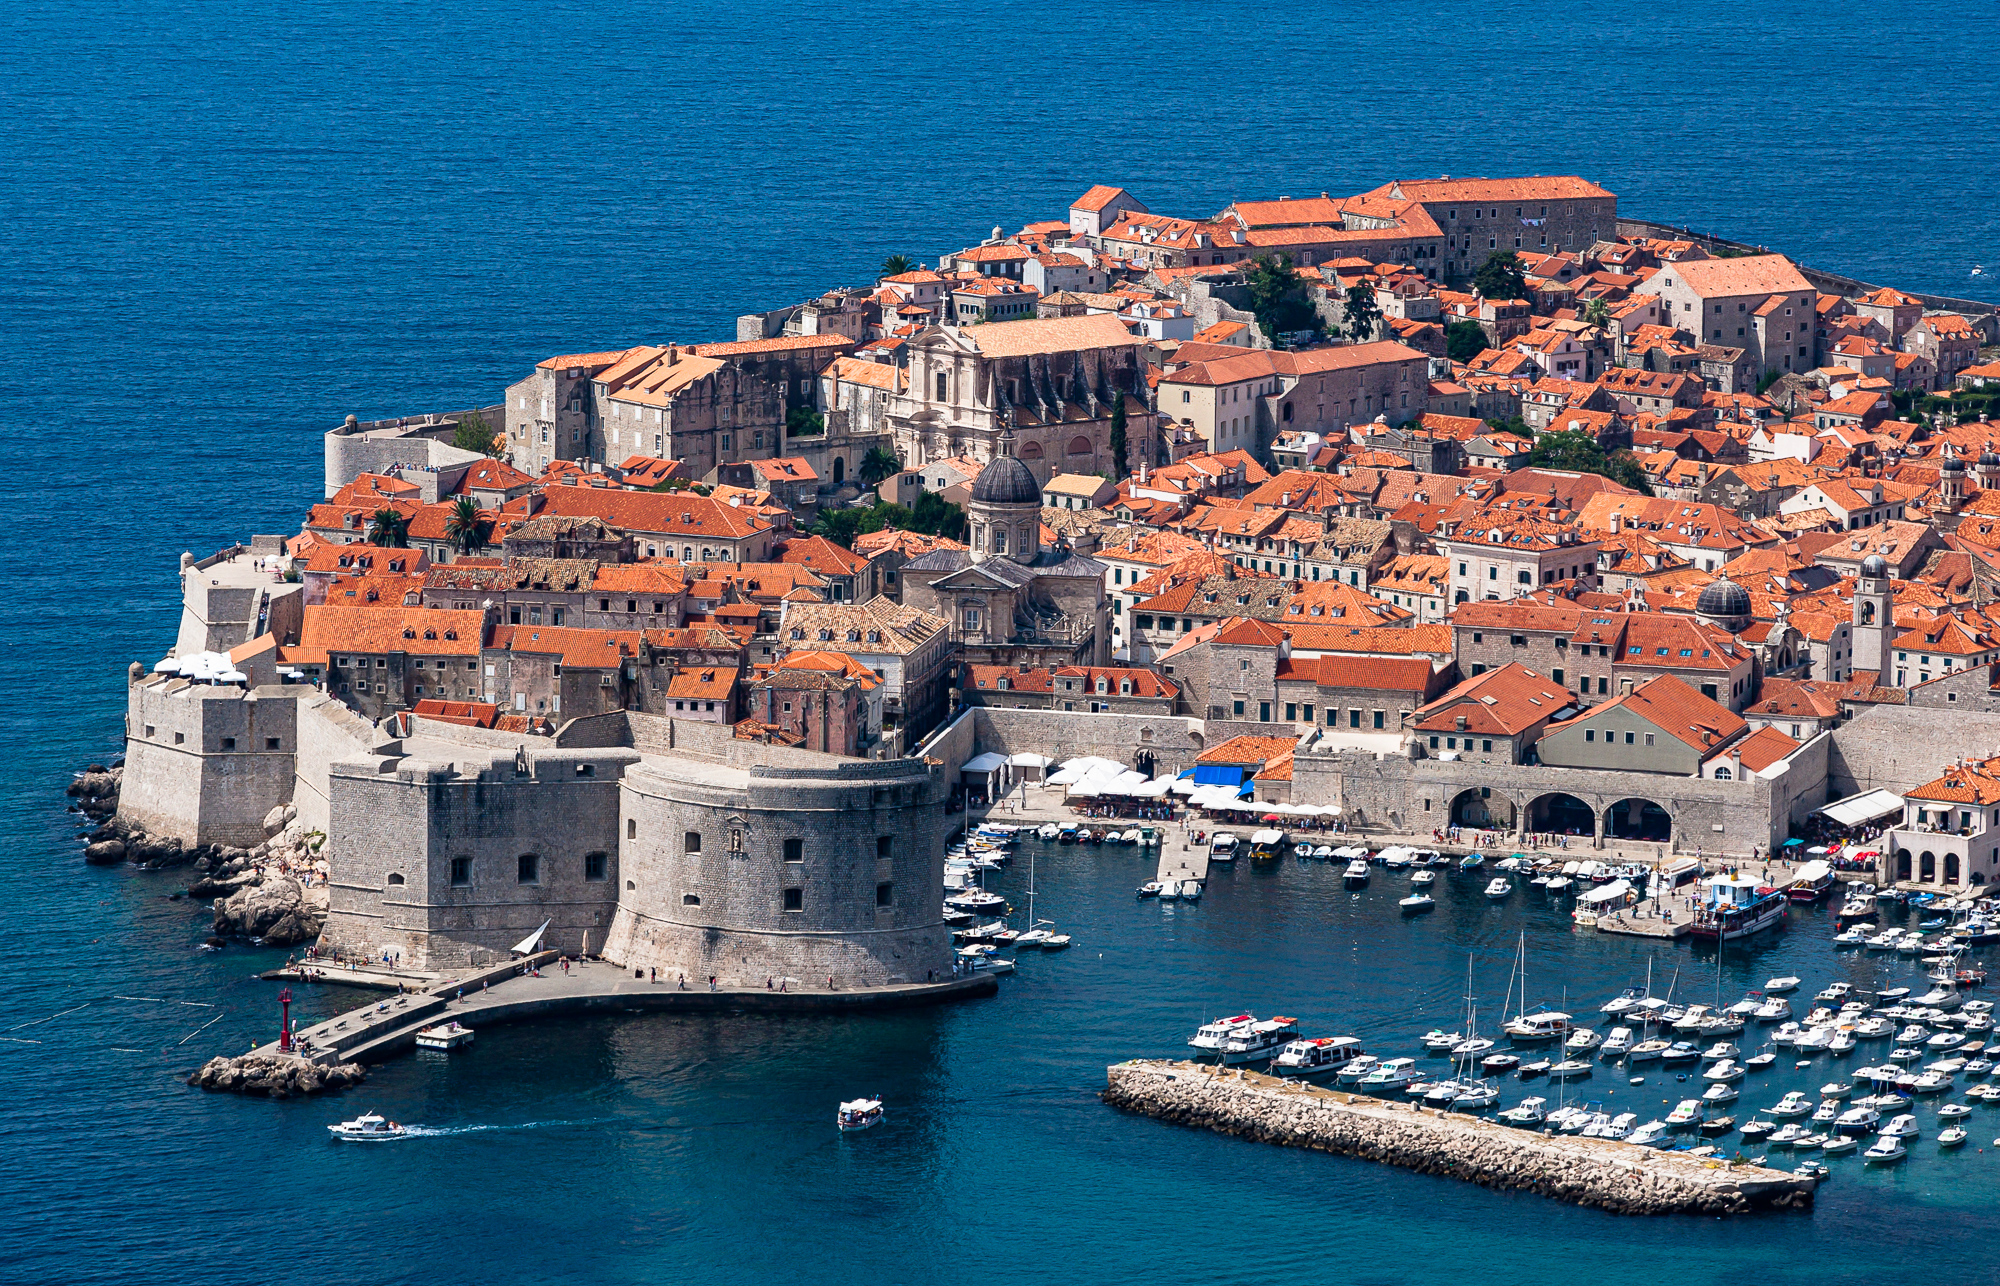 Old Dubrovnik seen from the mainland highway